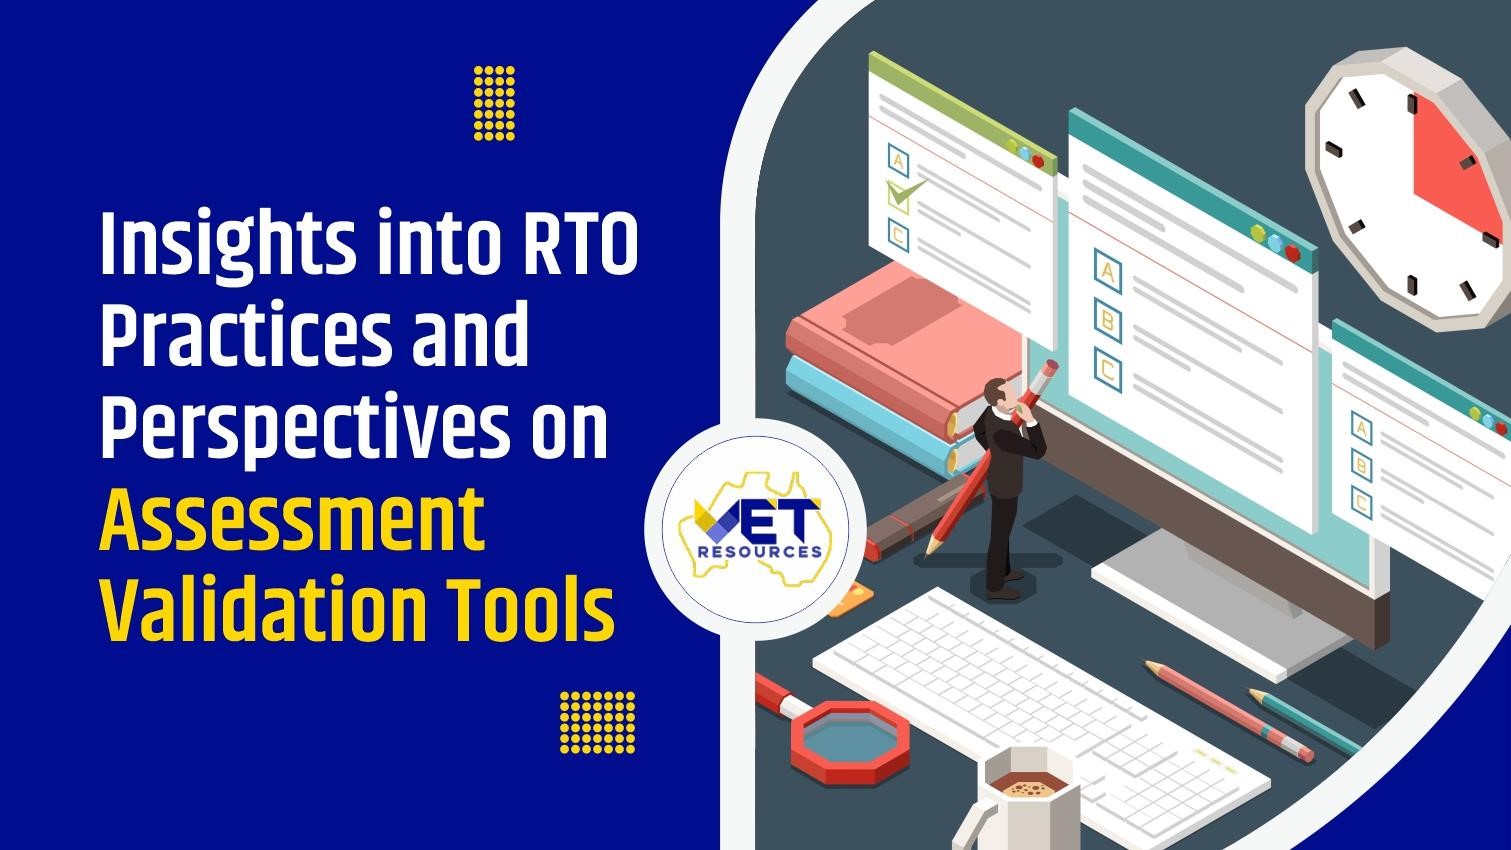 The Vocational Education and Training (VET) industry places a high value on assessment quality and validity. Registered Training Organisations (RTOs) play an essential function in providing qualifications that are not only recognised but also relevant in the workplace.